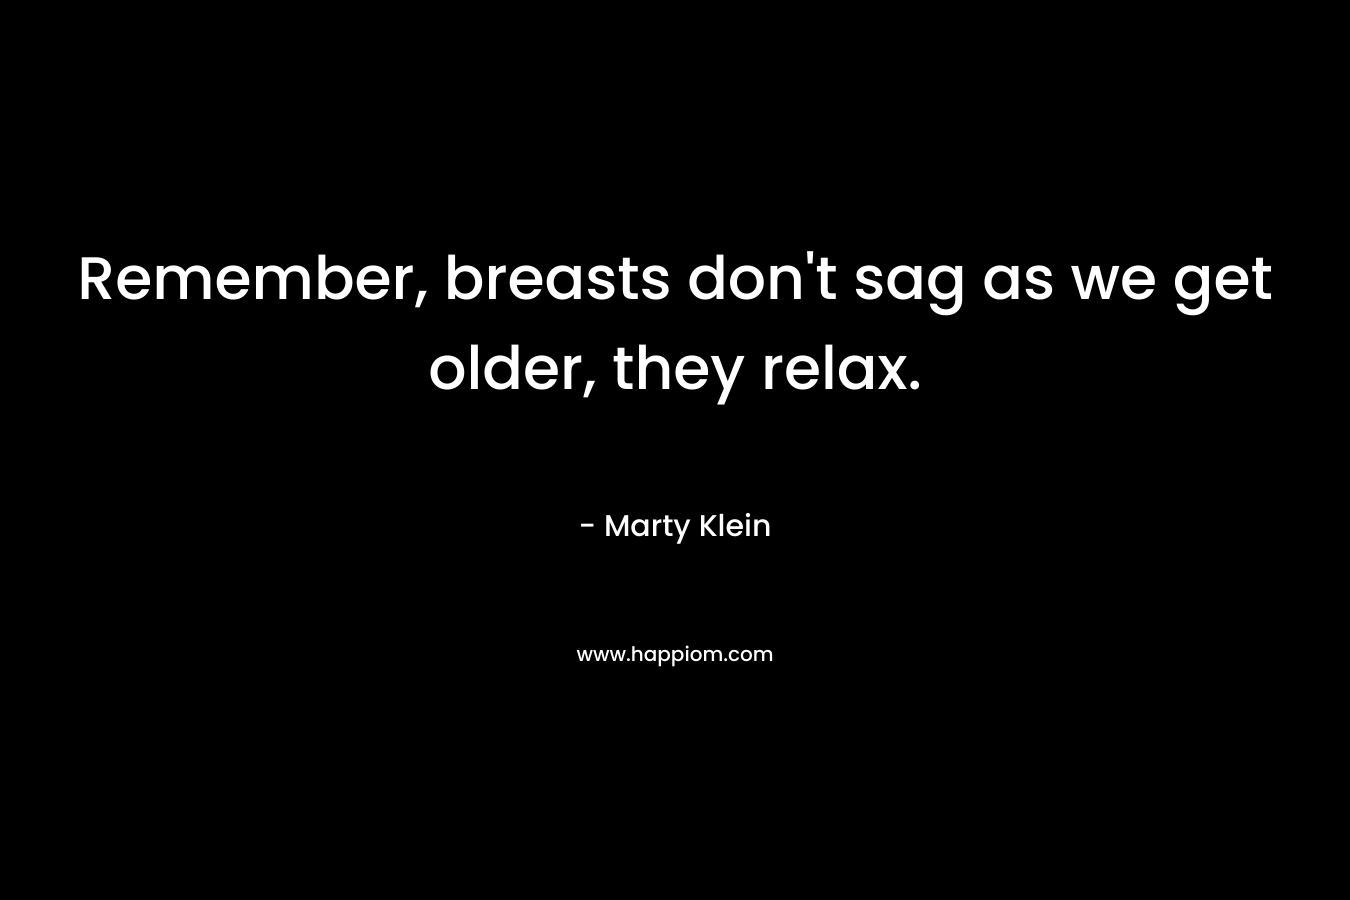 Remember, breasts don't sag as we get older, they relax.